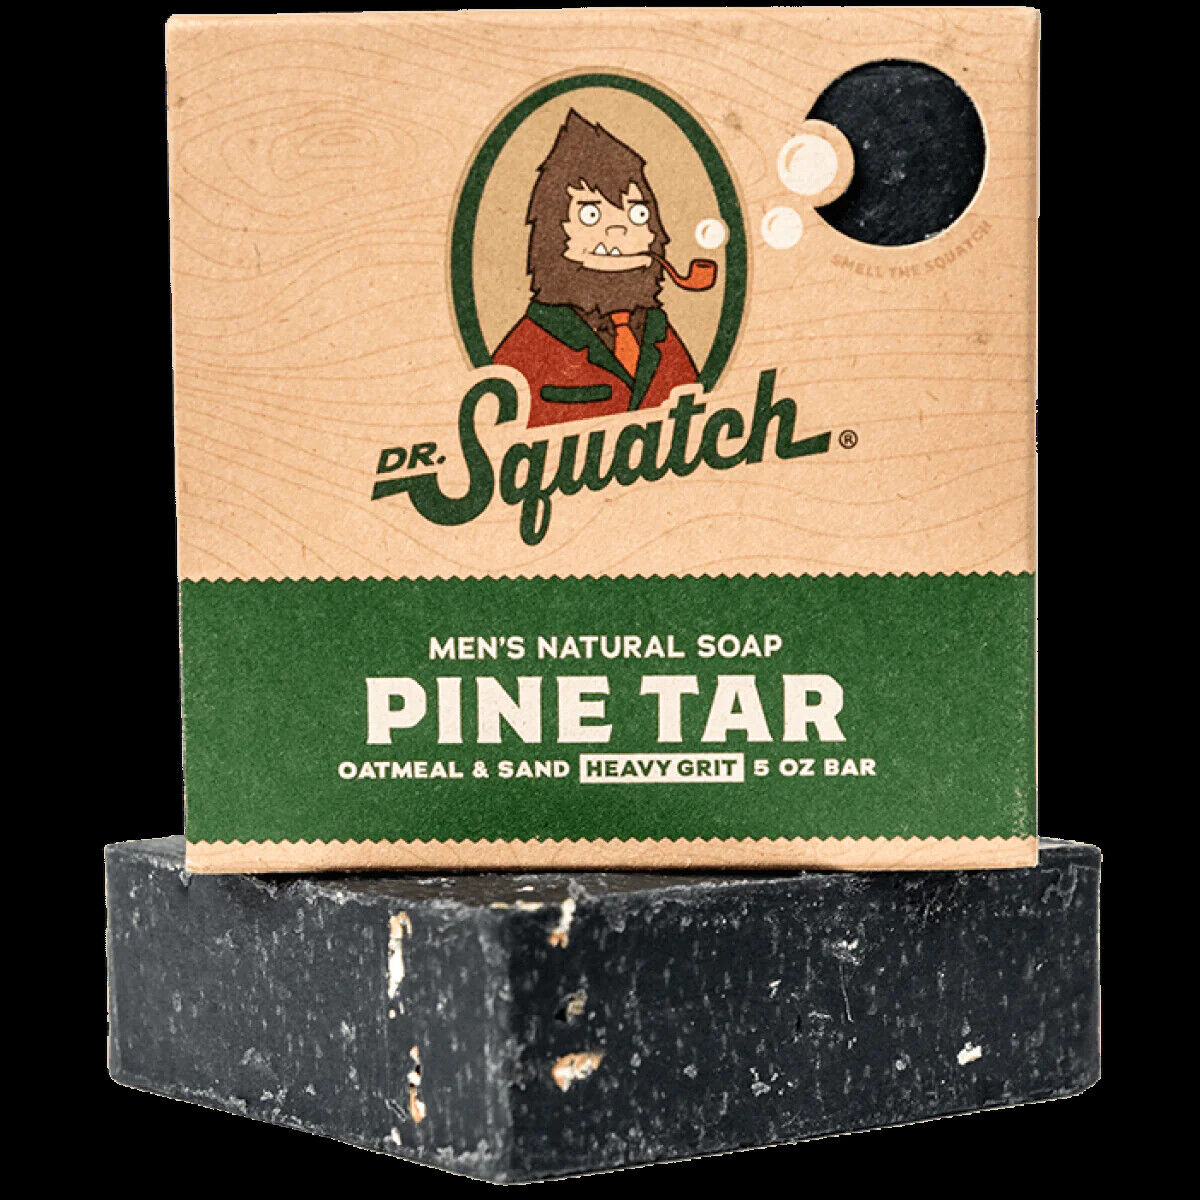 Dr Squatch Soaps, Deodorants, Hair Care & More. Large Selection. ⚡Fast Shipping⚡